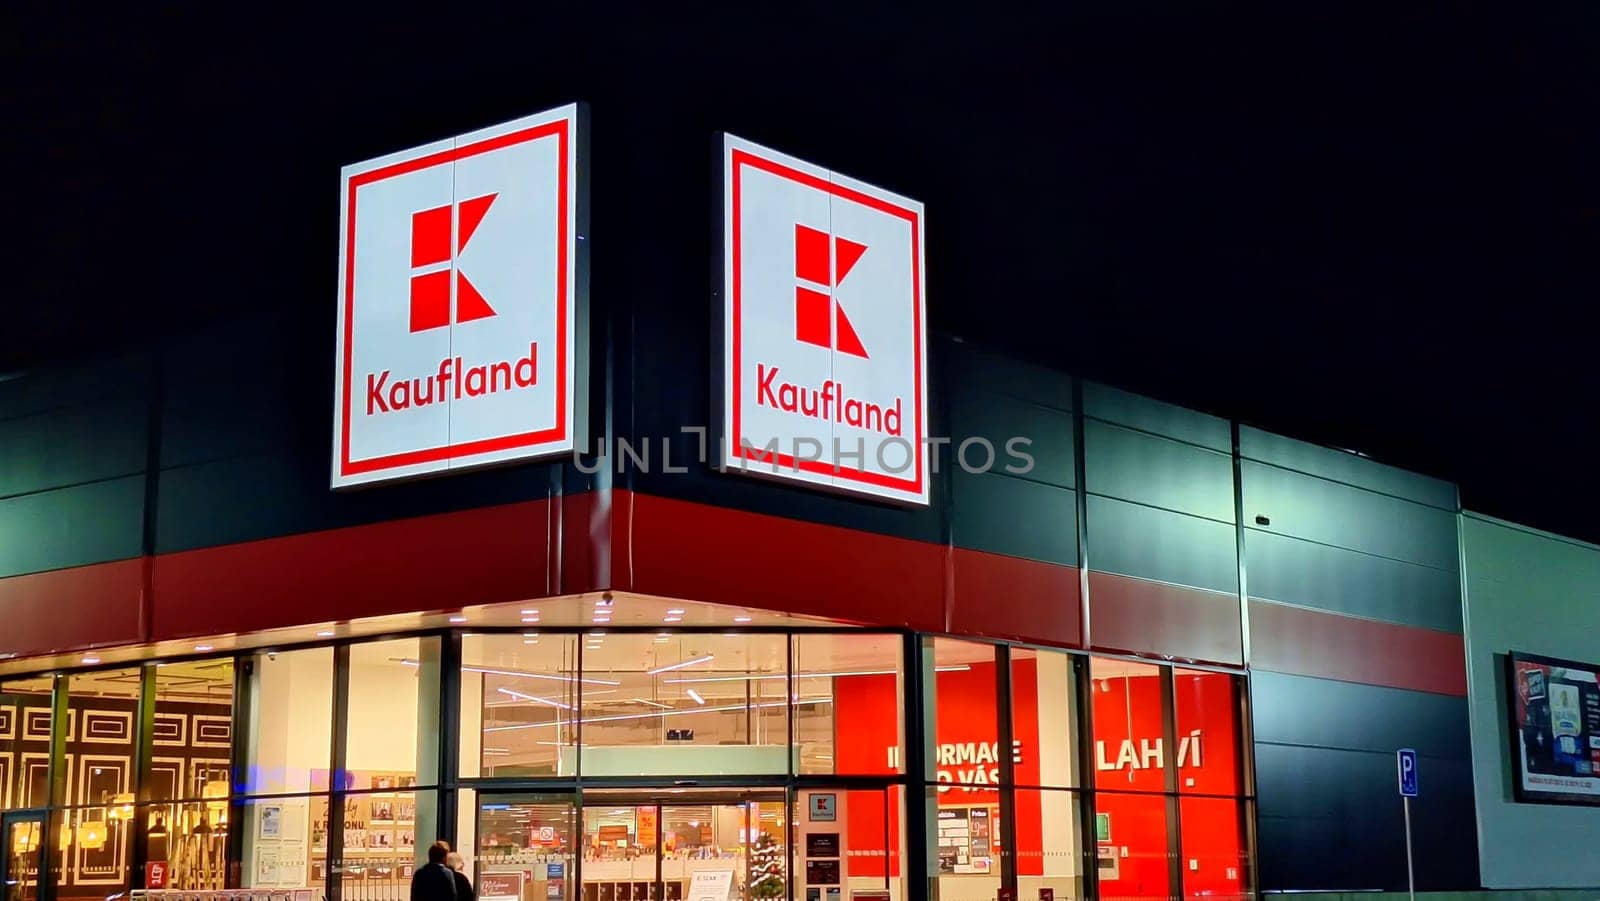 Kaufland logo on hypermarket from German chain, part of Schwartz Gruppe which also owns Lidl. It operates over 1,500 stores in Germany, Croatia, the Czech Republic, Slovakia, Poland, Romania, Bulgaria and Moldova. by roman_nerud